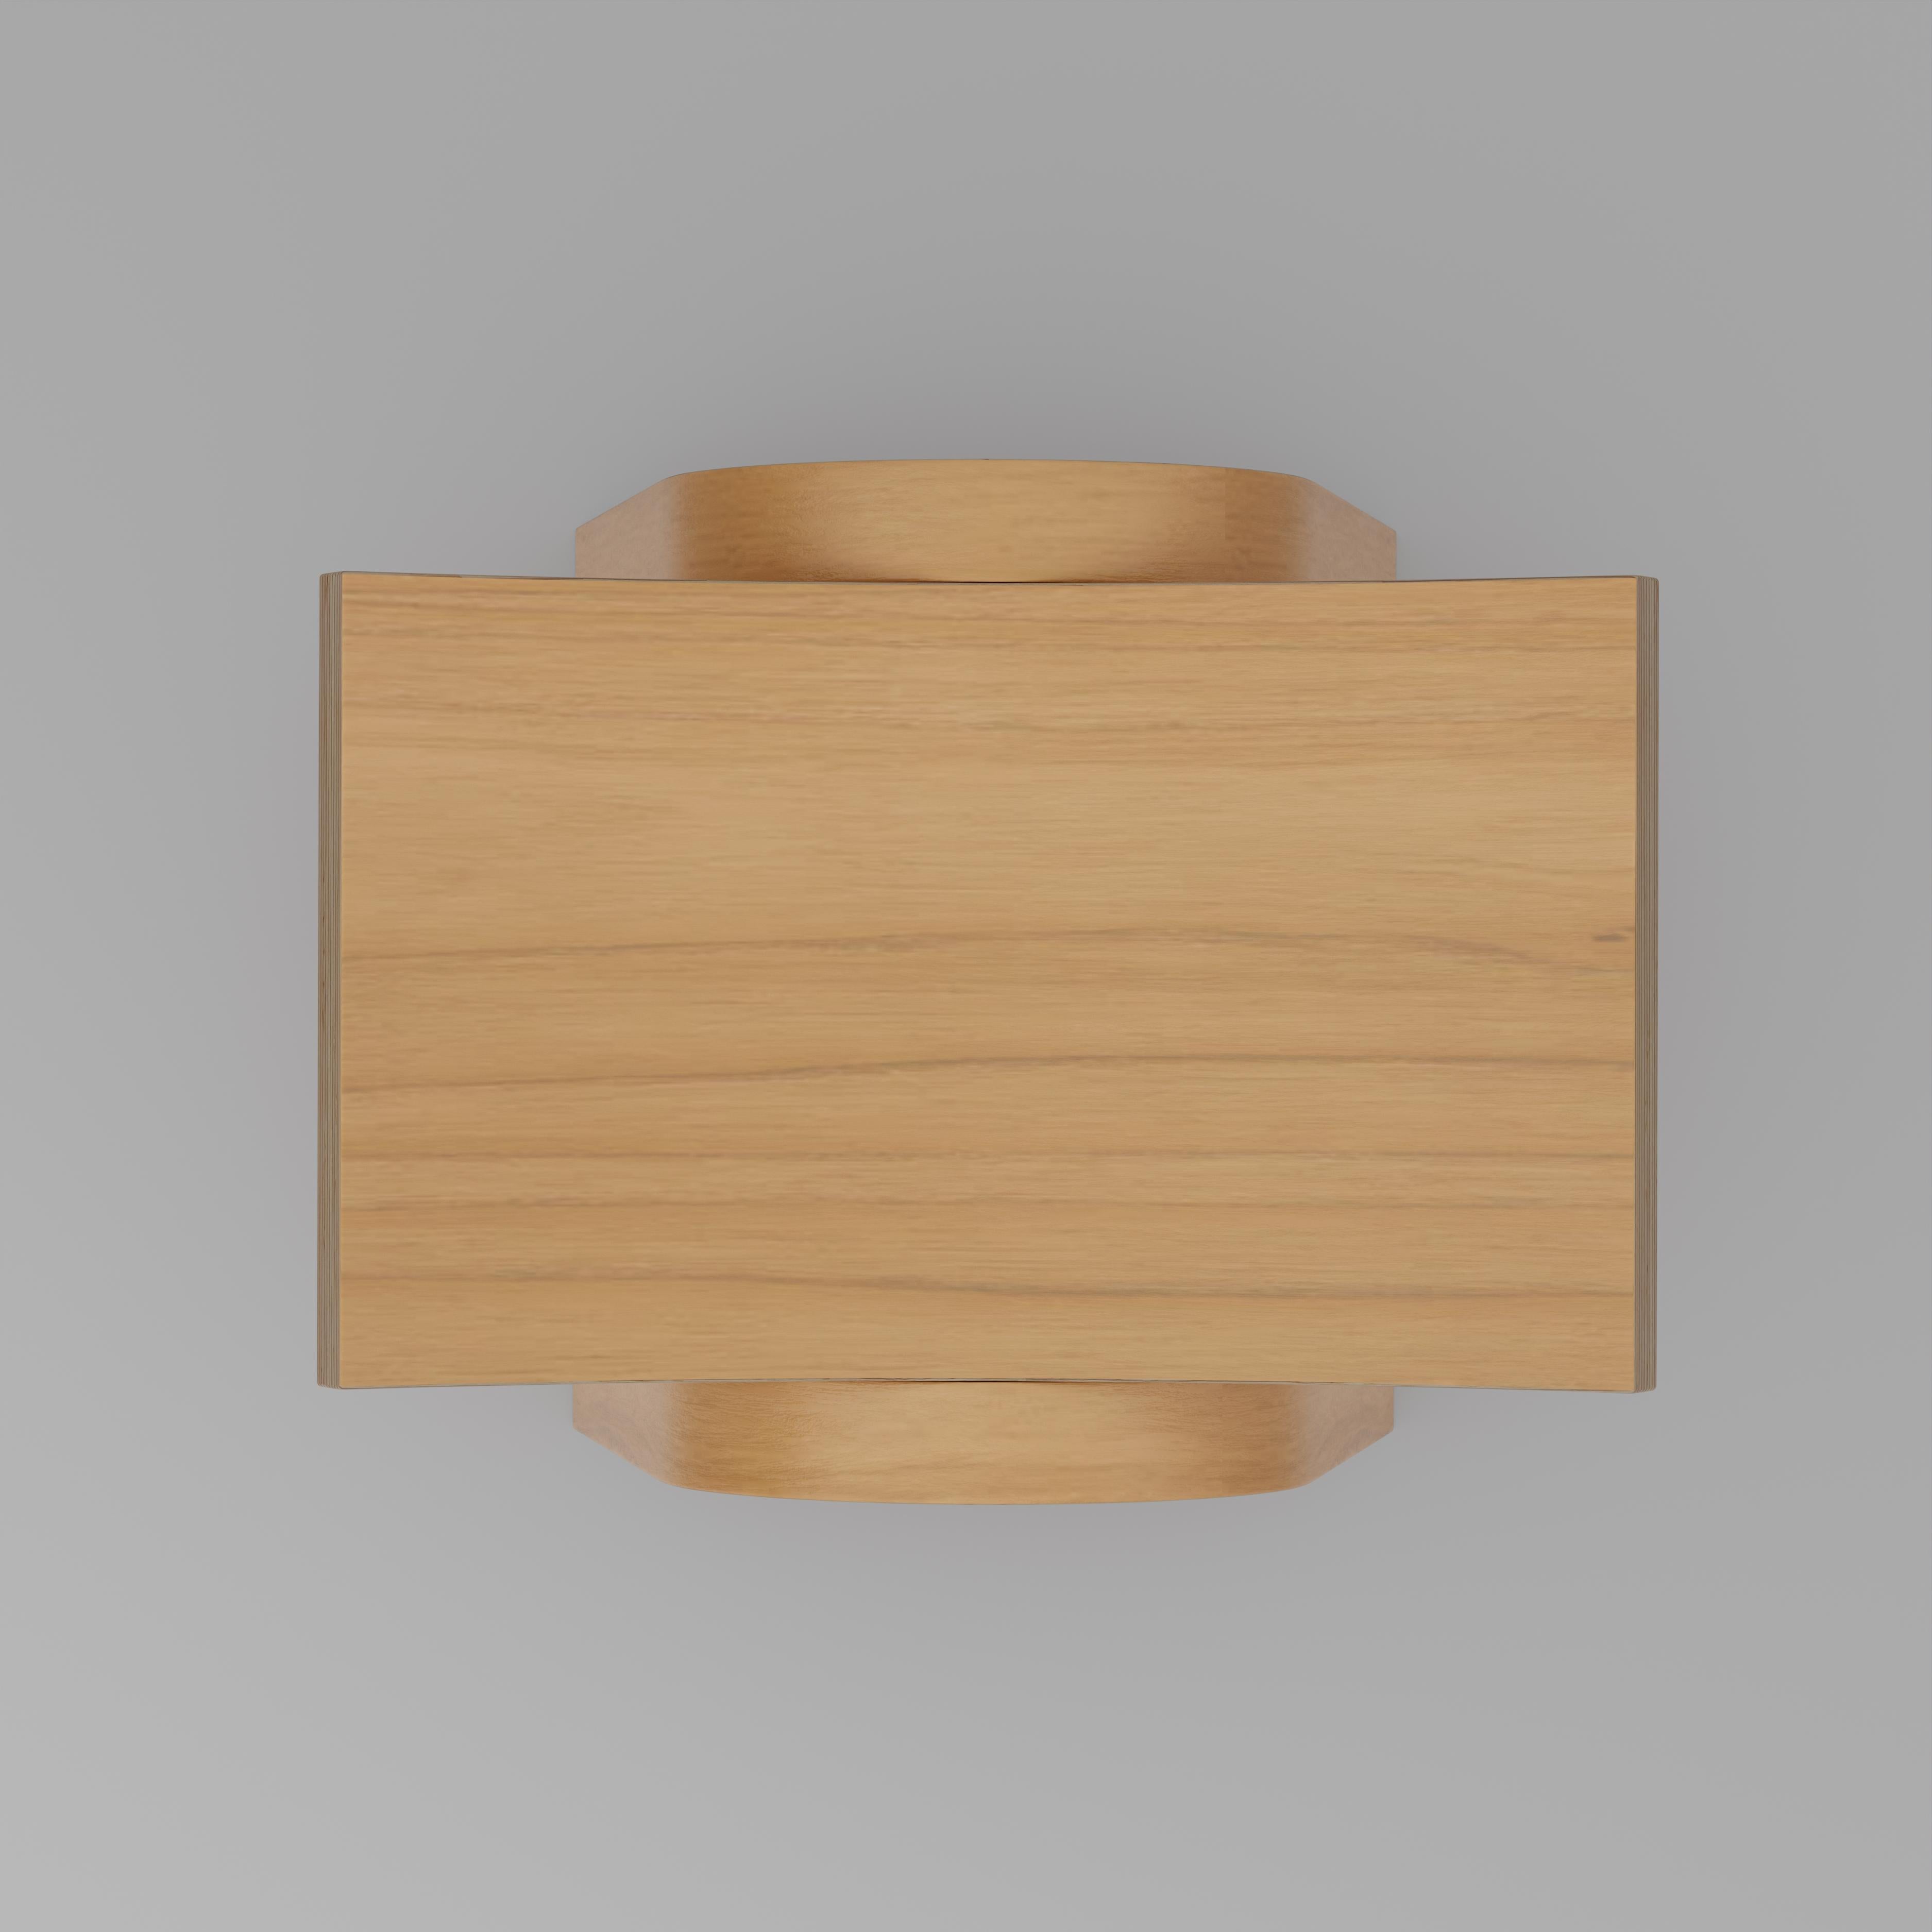 Bentwood Fuji Wood Stool, Minimalist and Modern Inspiration from Brazil by Tiago Curioni For Sale